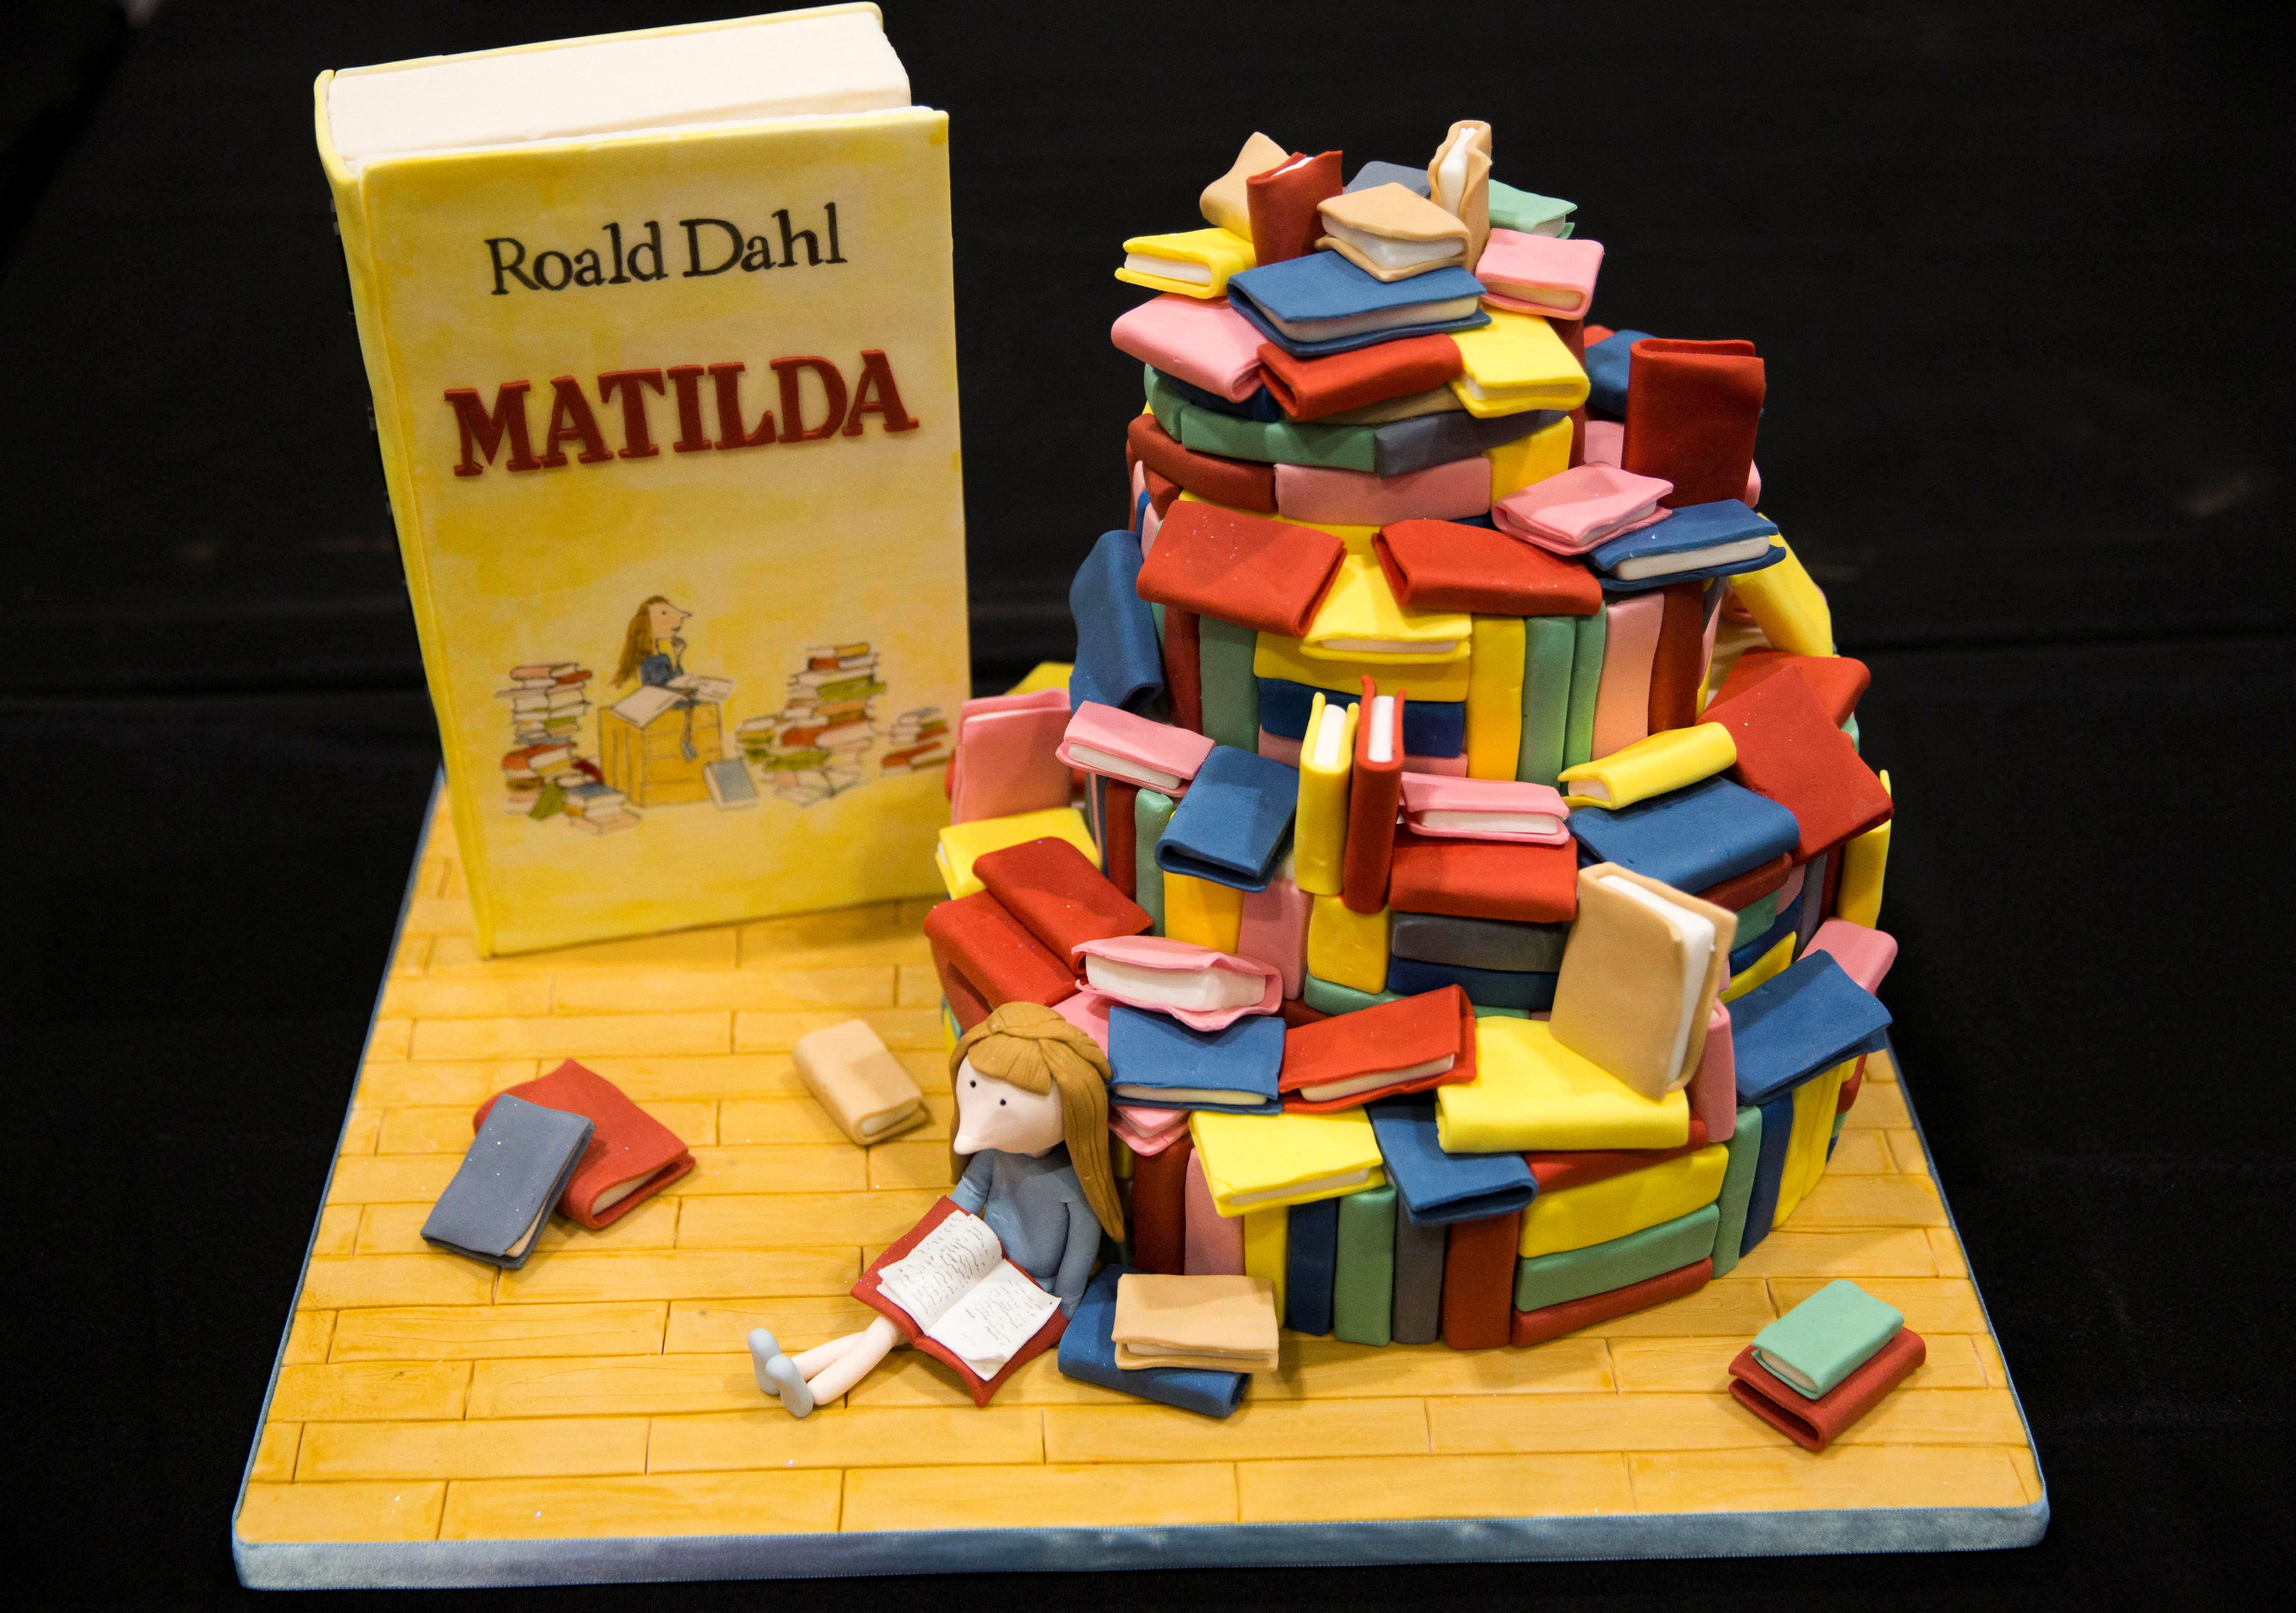 A cake decorated in the style of the Roald Dahl children's book "Matilda" is displayed at the Cake and Bake show in London, Britain